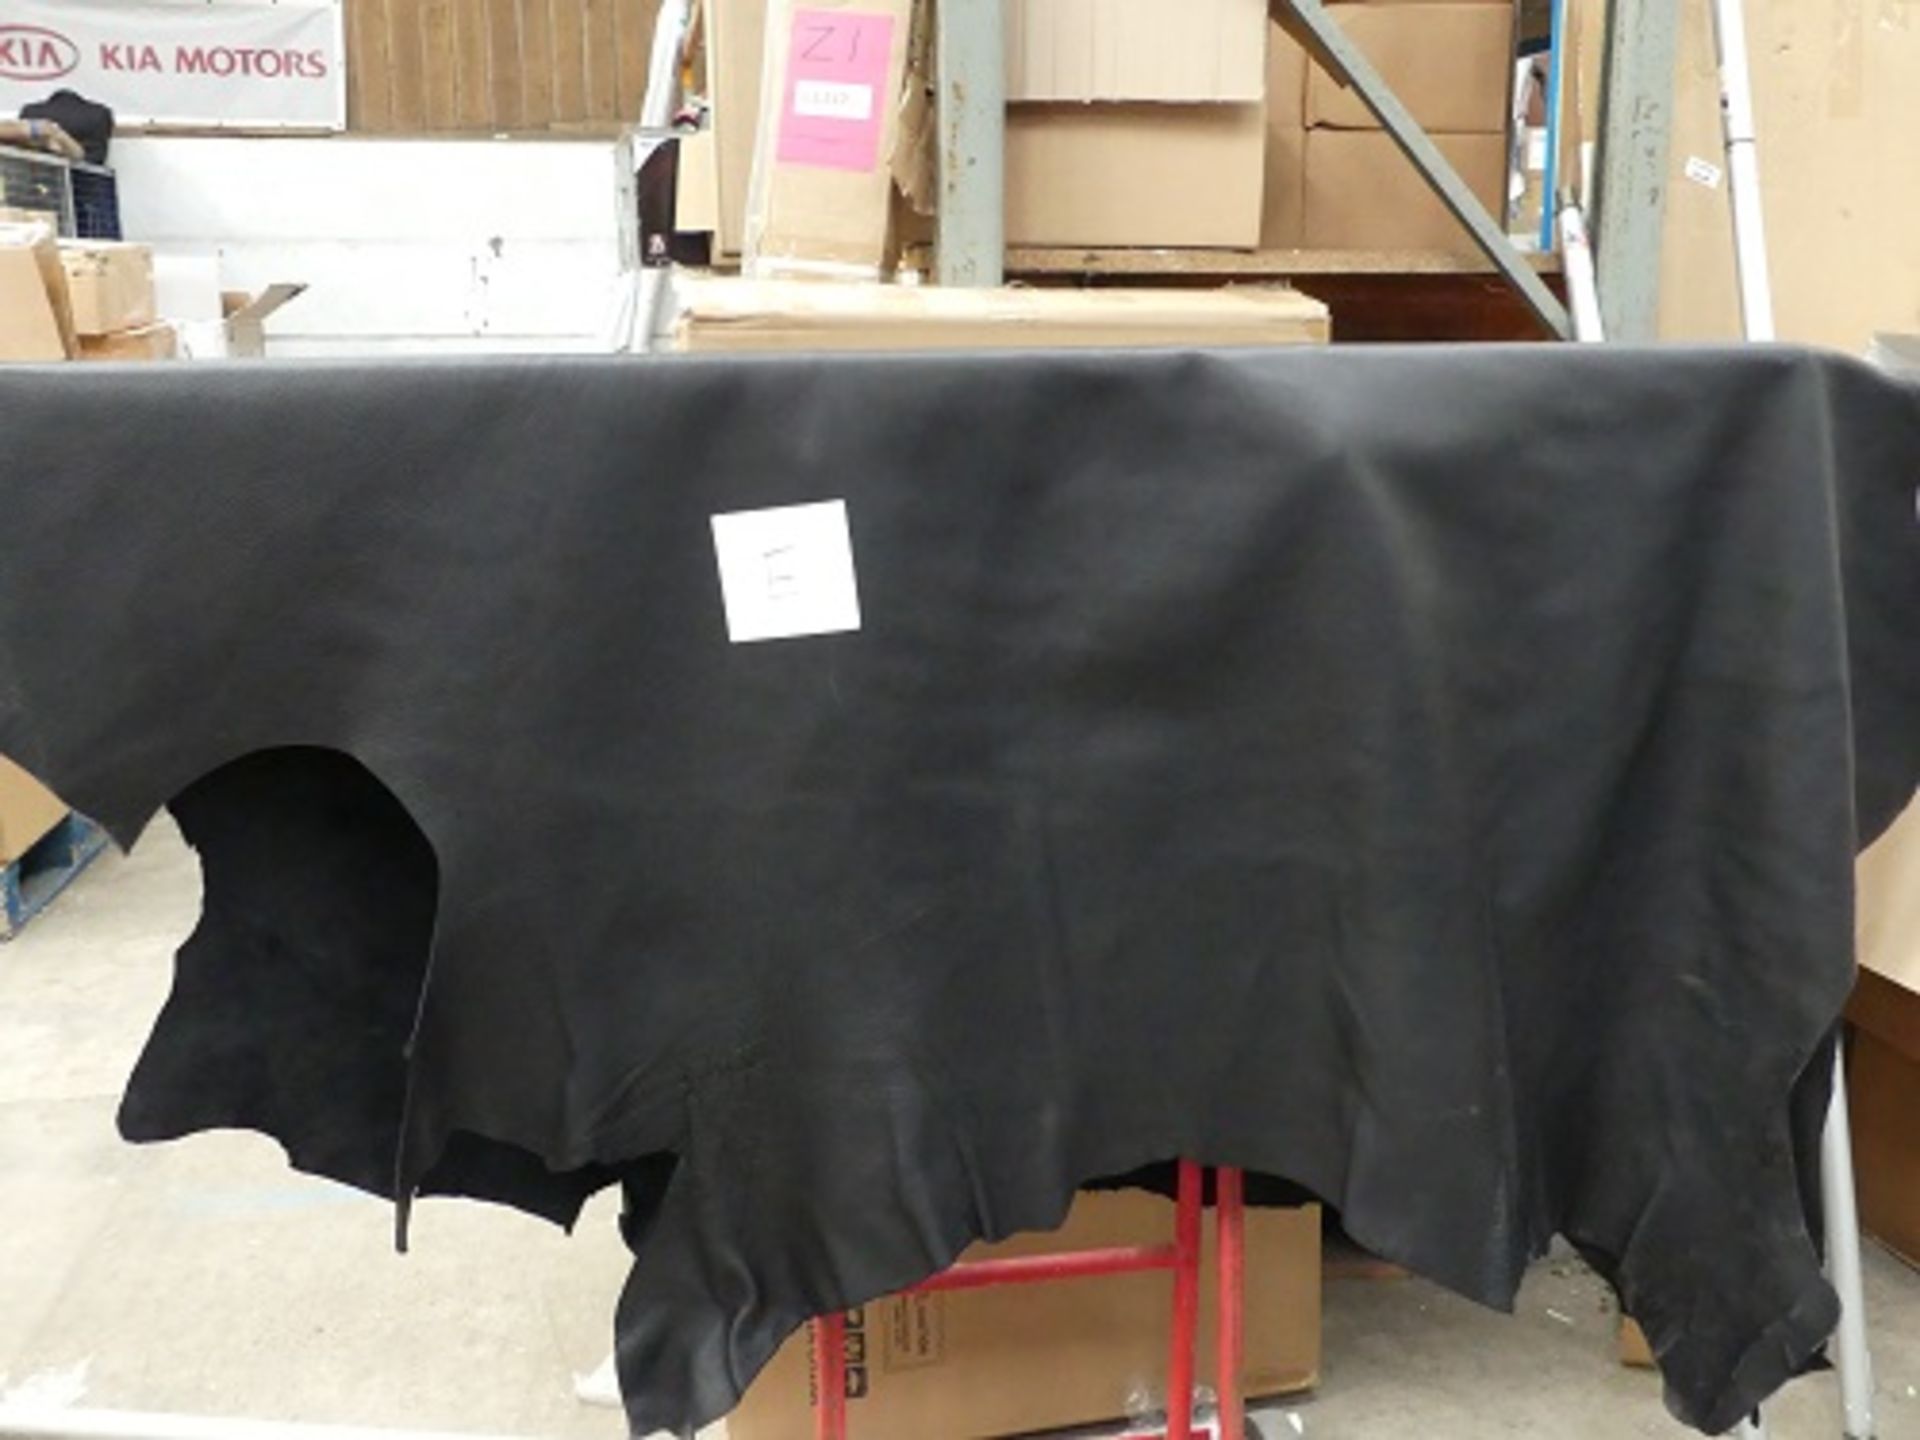 1 x Leather Hide full Skin -soft black, with mottled dull finish, size: approximately 5.8(w) x 4ft.